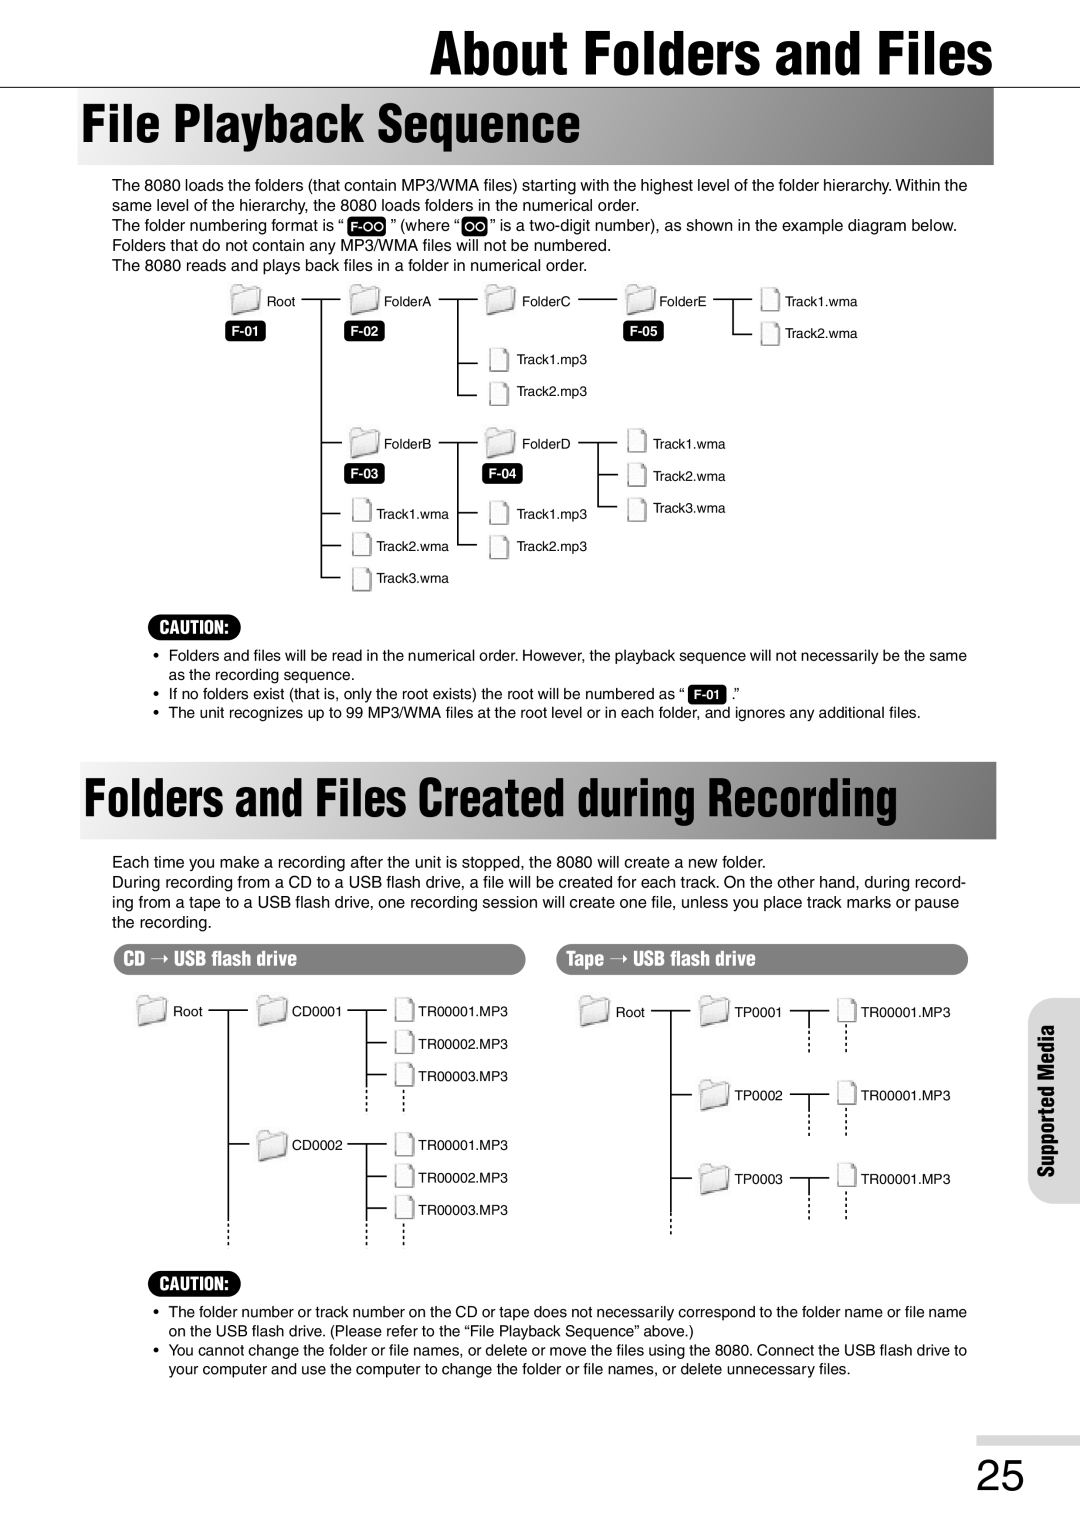 Eiki 8080 About Folders and Files, File Playback Sequence, Folders and Files Created during Recording, CD USB ﬂash drive 